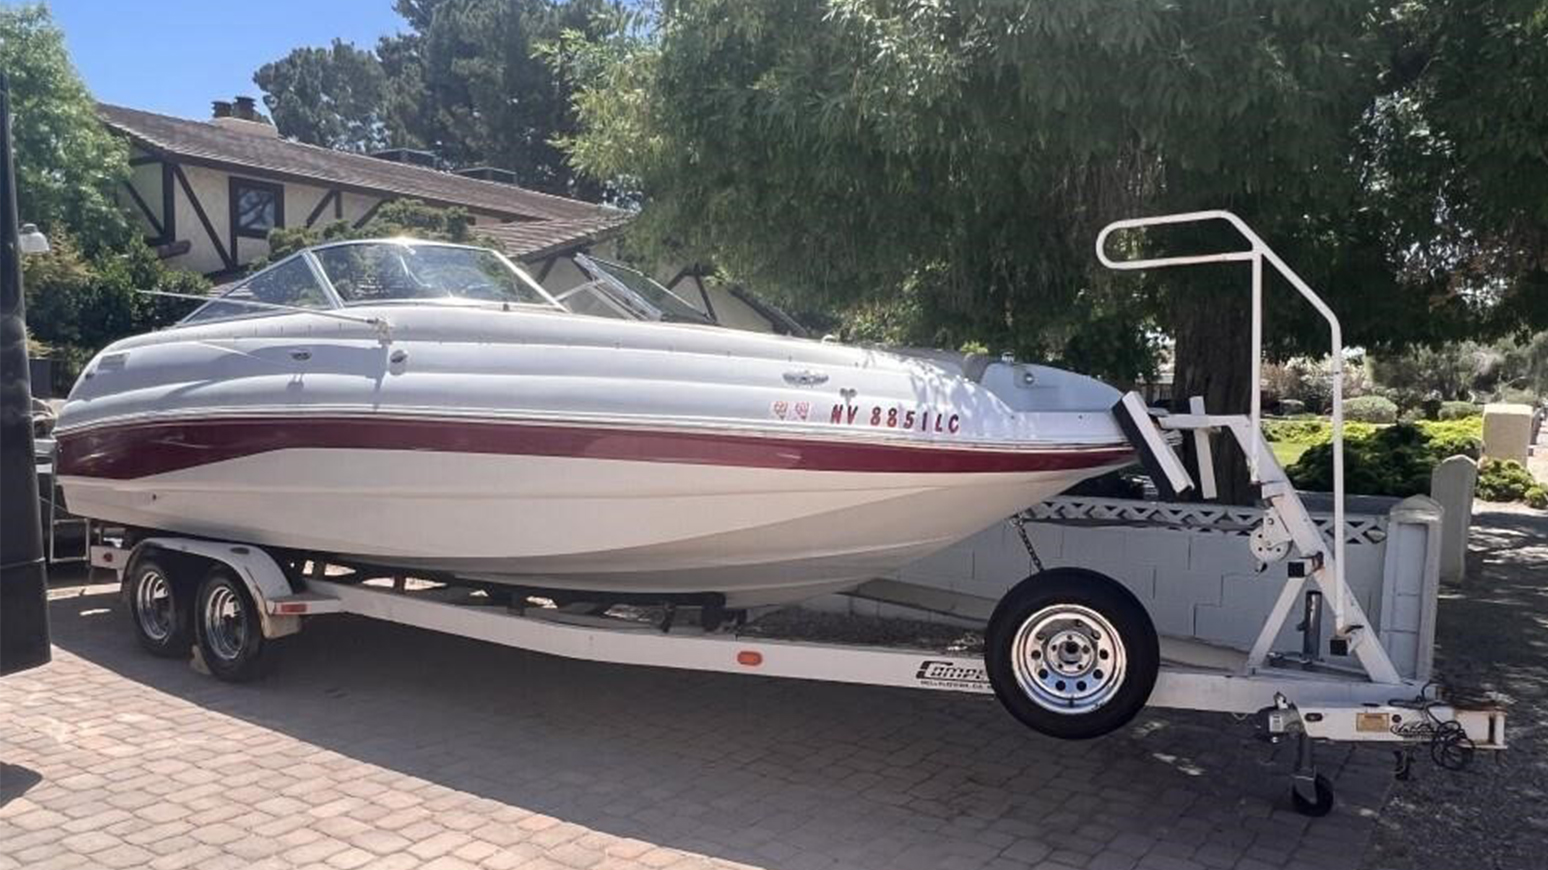 Find The Best Used Boats For Sale On HiBid.com